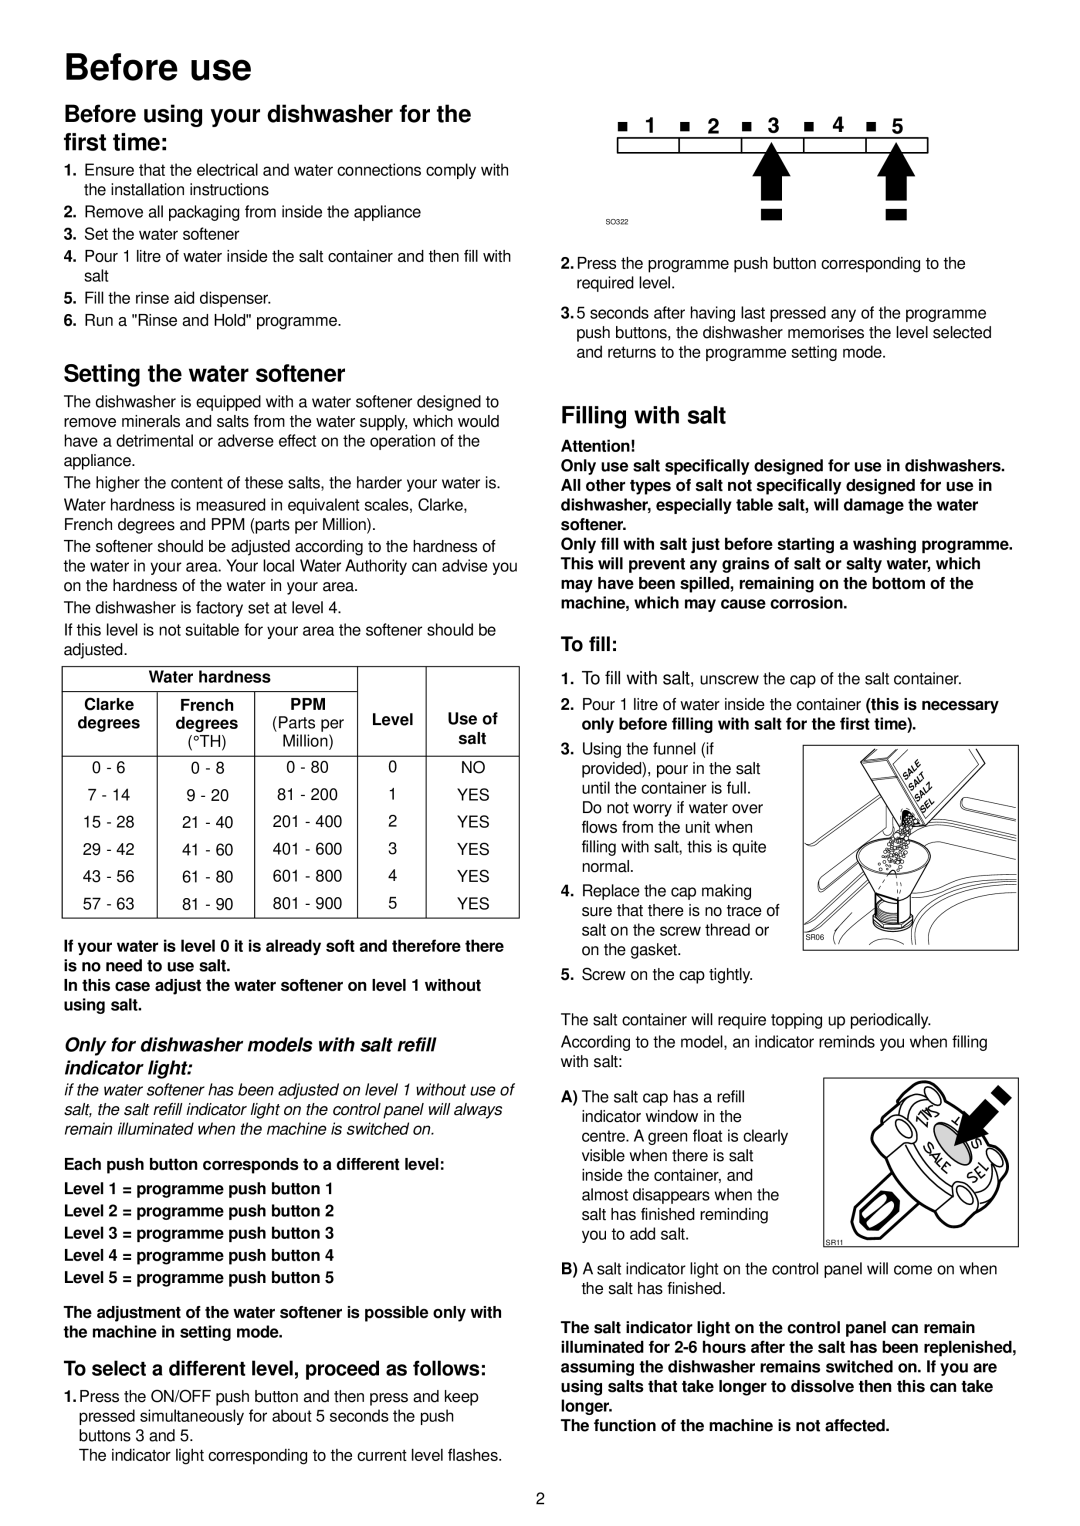 Zanussi ZDT 6253 manual Before use, Setting the water softener, Filling with salt, To fill 